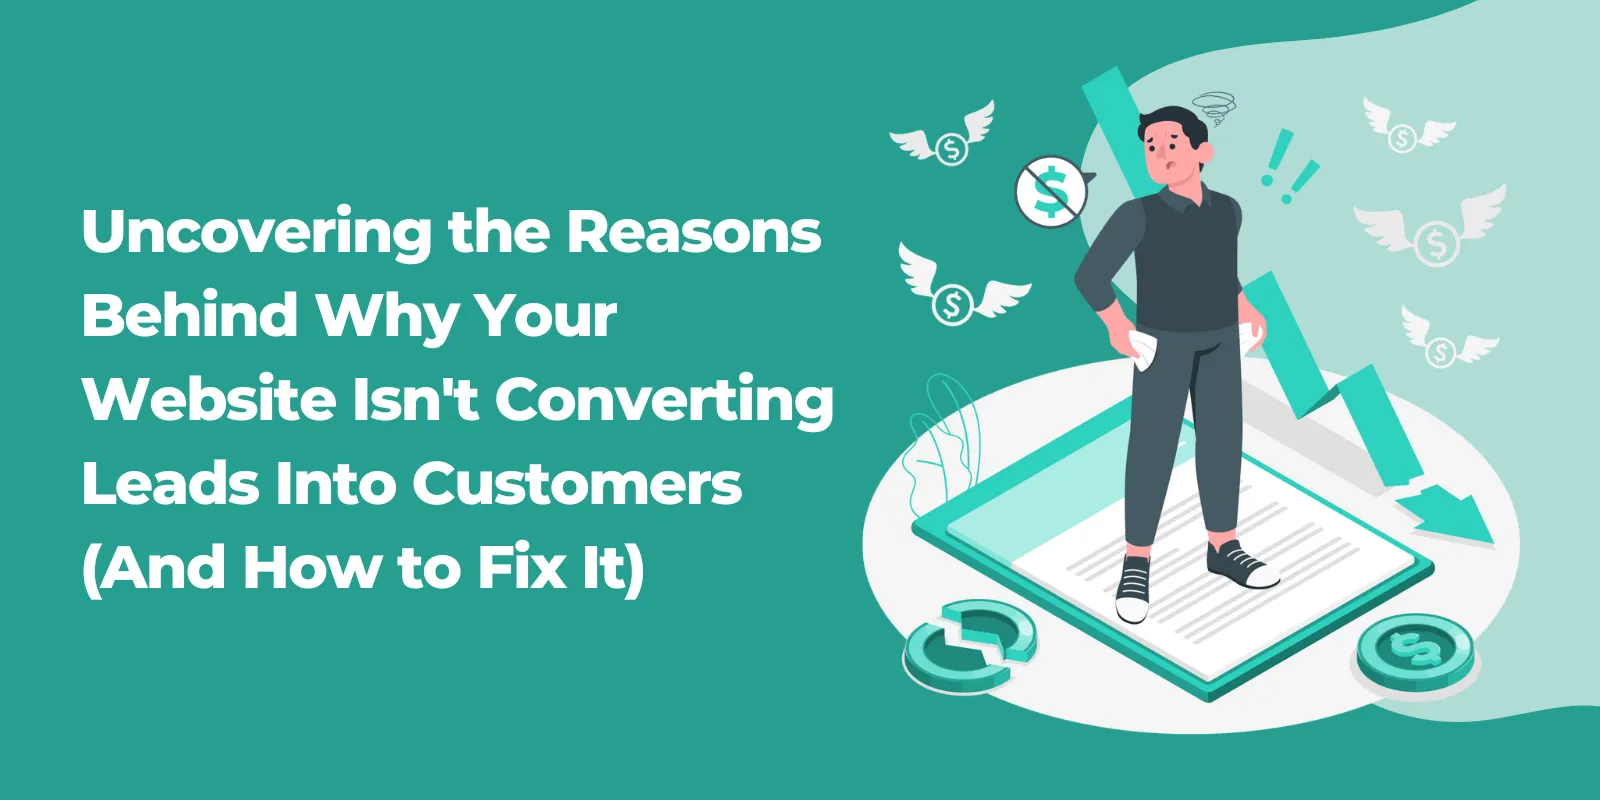 Uncovering-the-Reasons-Behind-Why-Your-Website-Isnt-Converting-Leads-Into-Customers-And-How-to-Fix-It